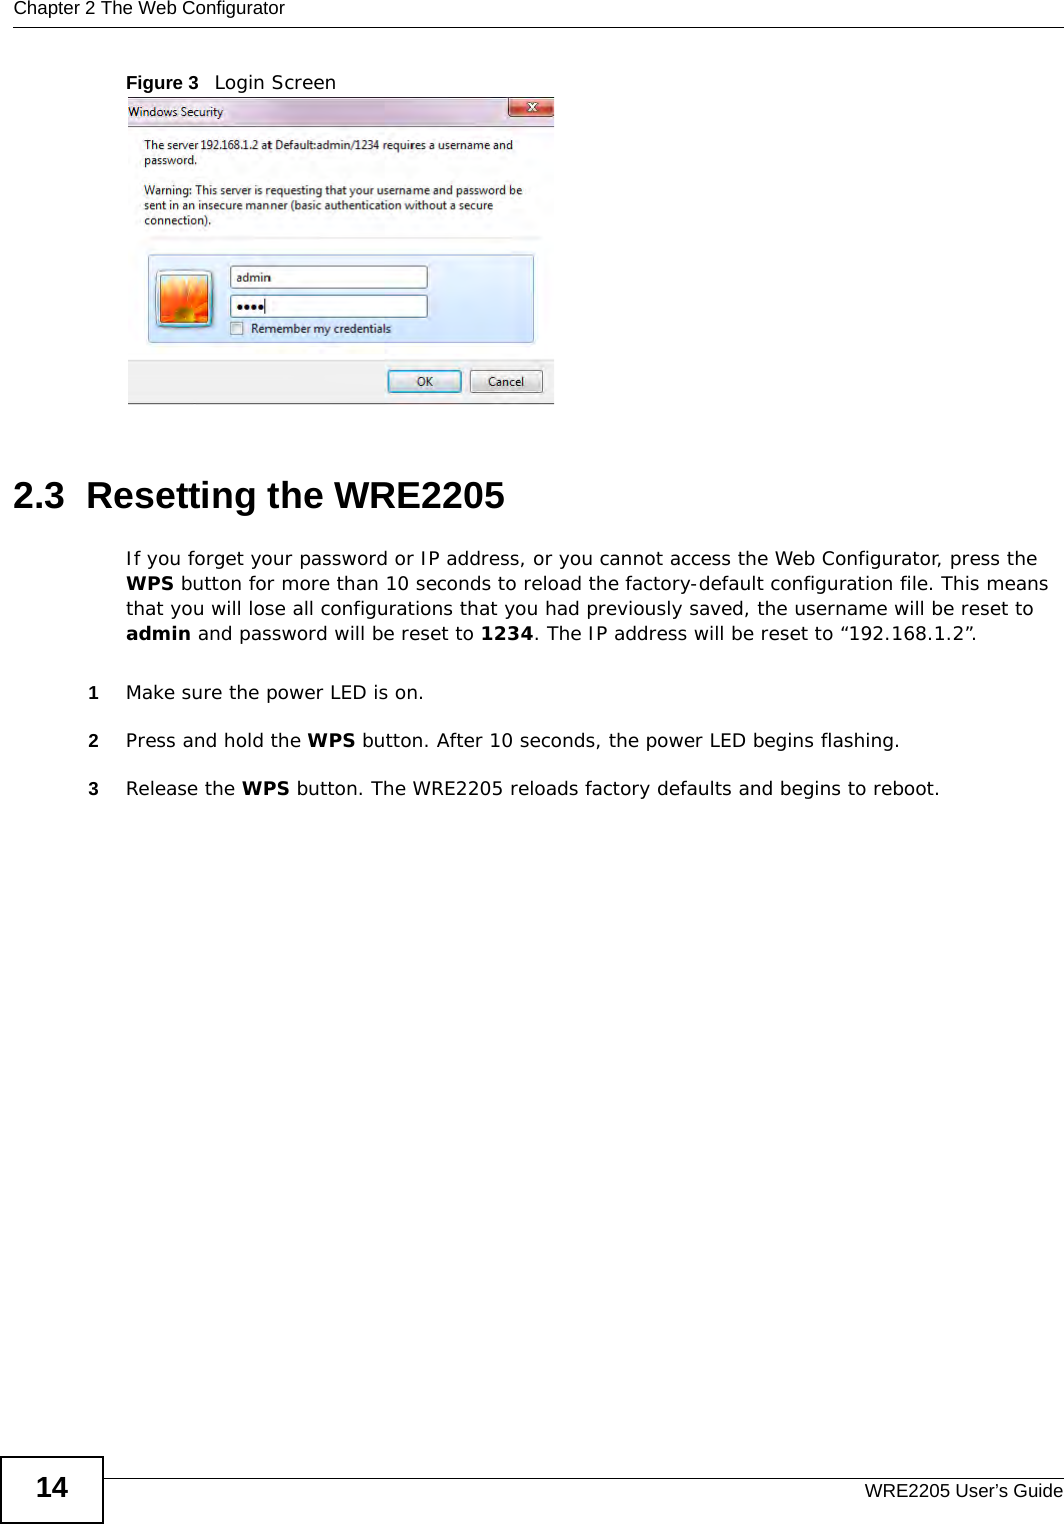 Chapter 2 The Web ConfiguratorWRE2205 User’s Guide14Figure 3   Login Screen2.3  Resetting the WRE2205If you forget your password or IP address, or you cannot access the Web Configurator, press the WPS button for more than 10 seconds to reload the factory-default configuration file. This means that you will lose all configurations that you had previously saved, the username will be reset to admin and password will be reset to 1234. The IP address will be reset to “192.168.1.2”.1Make sure the power LED is on.2Press and hold the WPS button. After 10 seconds, the power LED begins flashing.3Release the WPS button. The WRE2205 reloads factory defaults and begins to reboot.